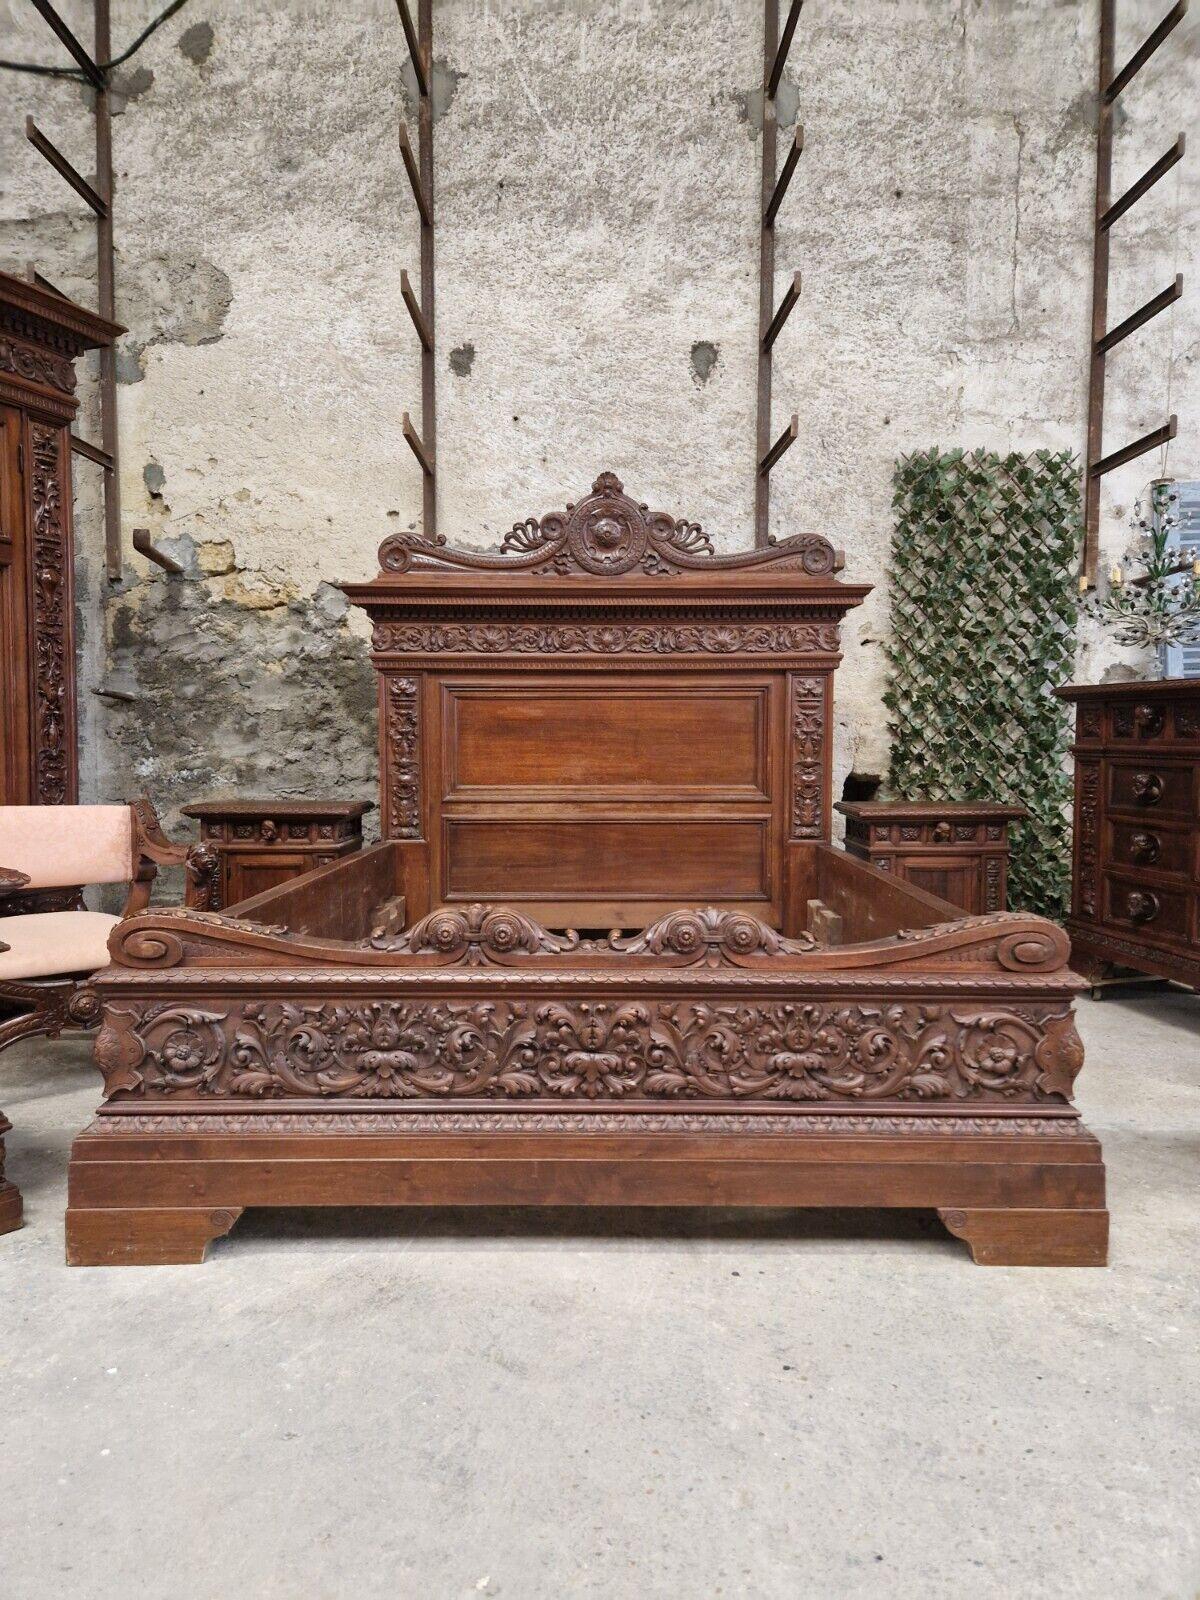 
This exquisite 7-piece bedroom set features a magnificent king-size bed with an impressive Renaissance-style headboard and footboard, crafted from beautiful walnut wood. The bed has a fabulous large heavily carved side rails. The set and comes with